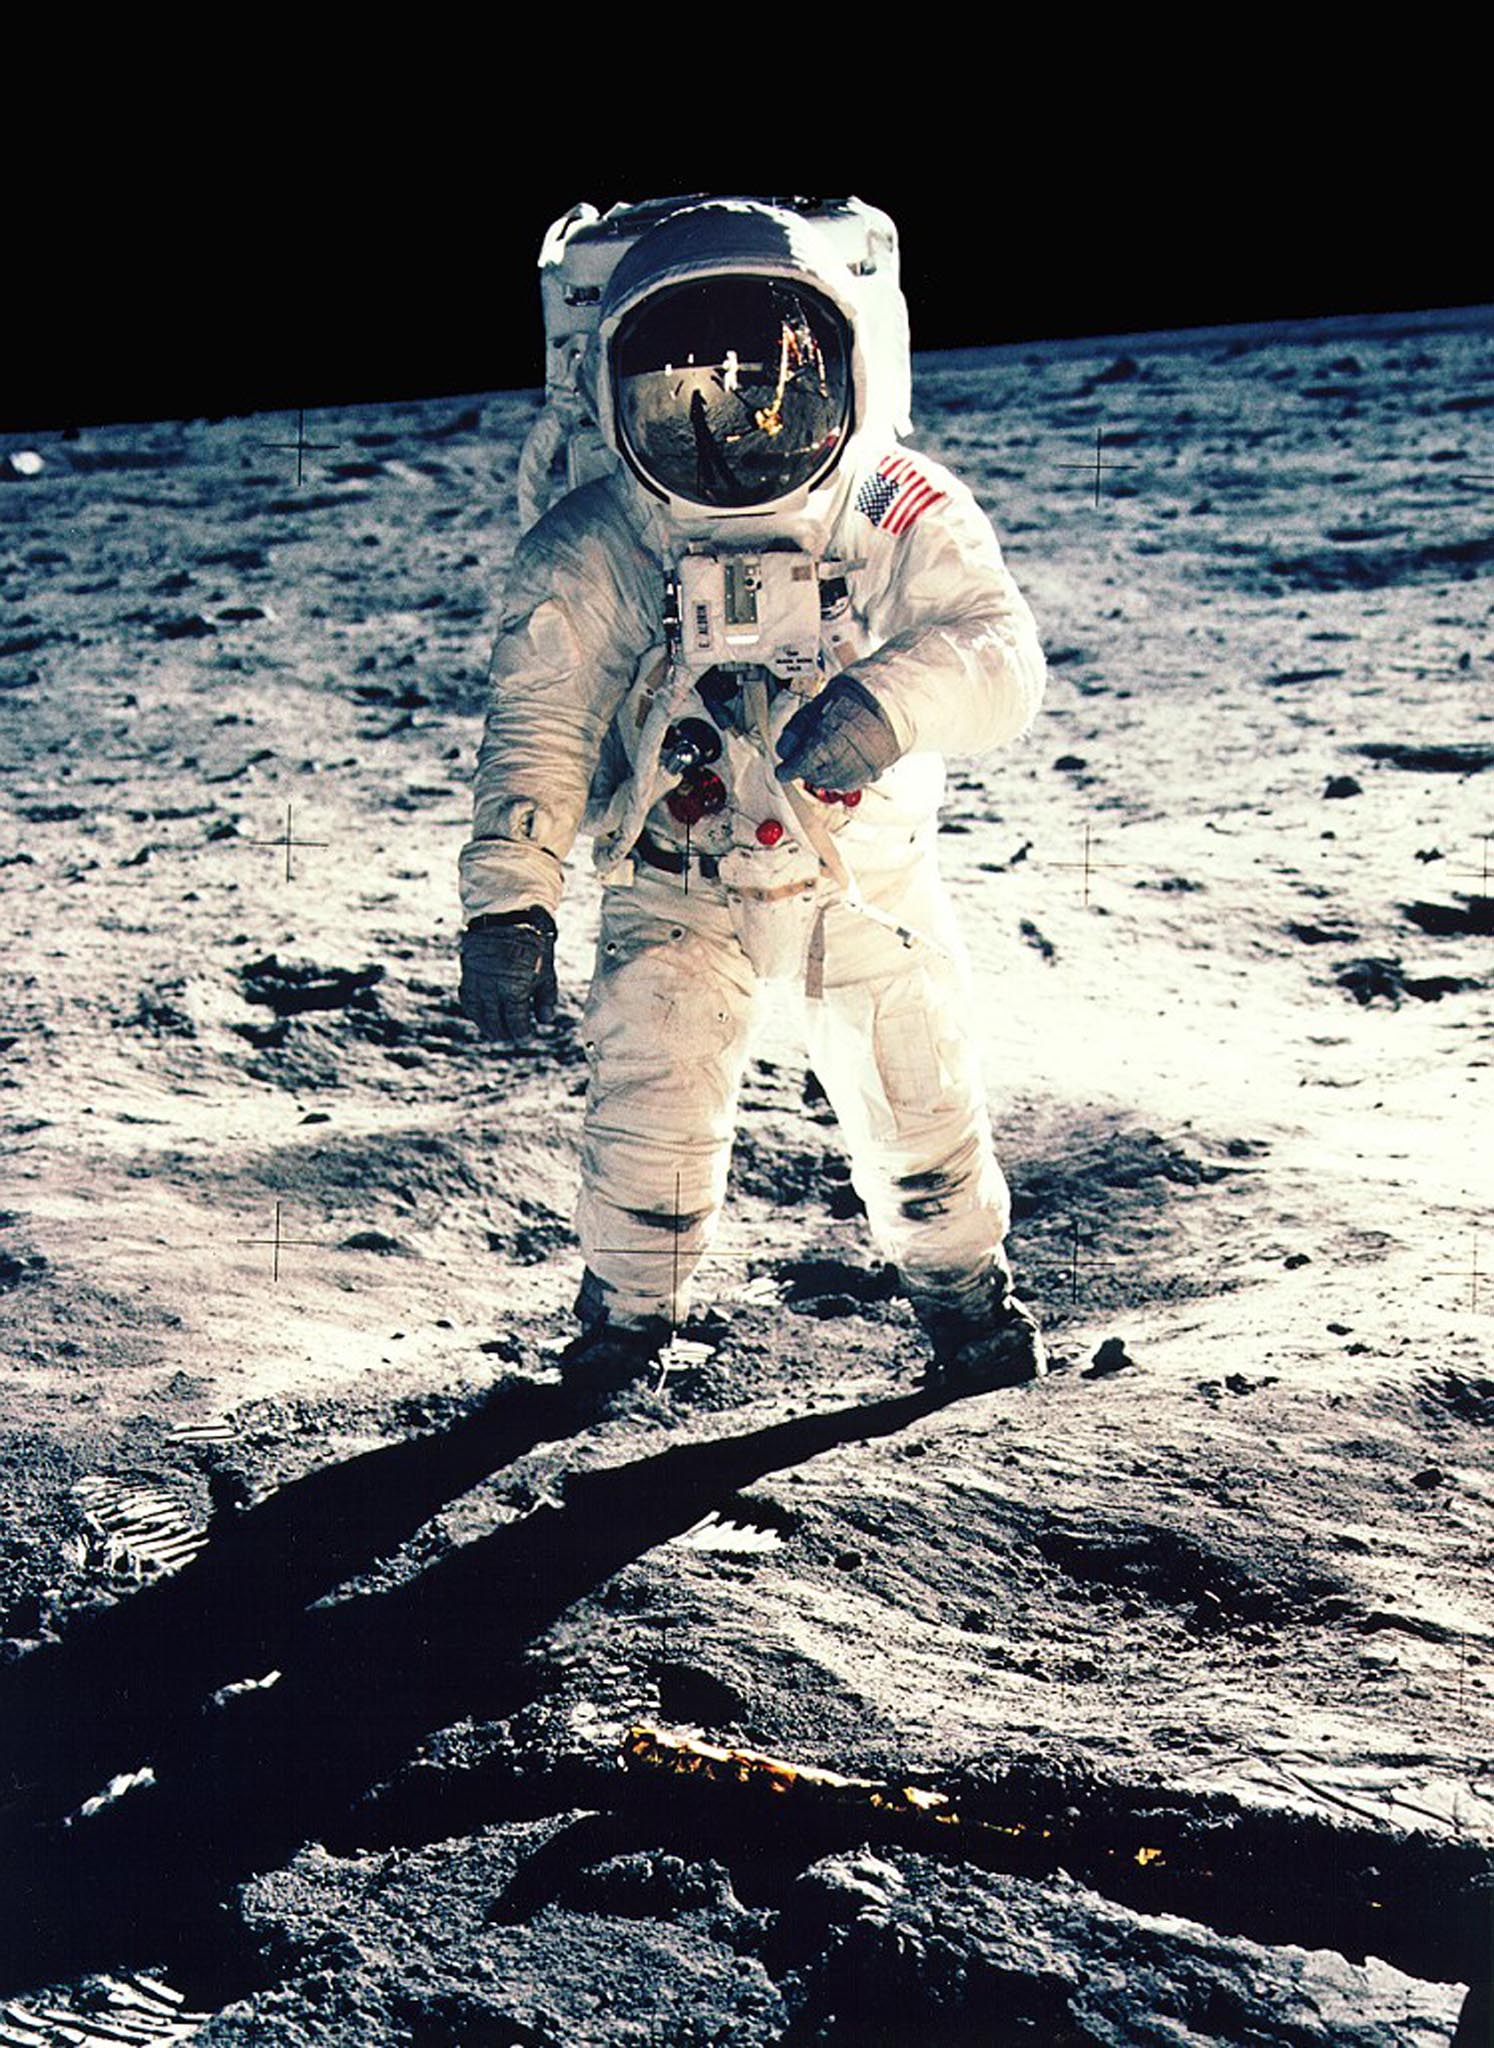 - FILE PHOTO JULY 1969 - Astronaut Edwin F. "Buzz" Aldrin Jr., lunar module pilot, faces the camera as he walks on the Moon during Apollo 11 extra vehicular activity in this file photograph. The plexiglass of his helmet reflects back the scene in front of him, such as the Lunar Module and Astronaut Neil Armstrong, taking his picture. Armstrong, Apollo 11 commander, took this photograph with a 70mm lunar surface camera. The 30th anniversary of the Apollo 11 mission is July 16 (launch) and July 20 (landing on the moon).